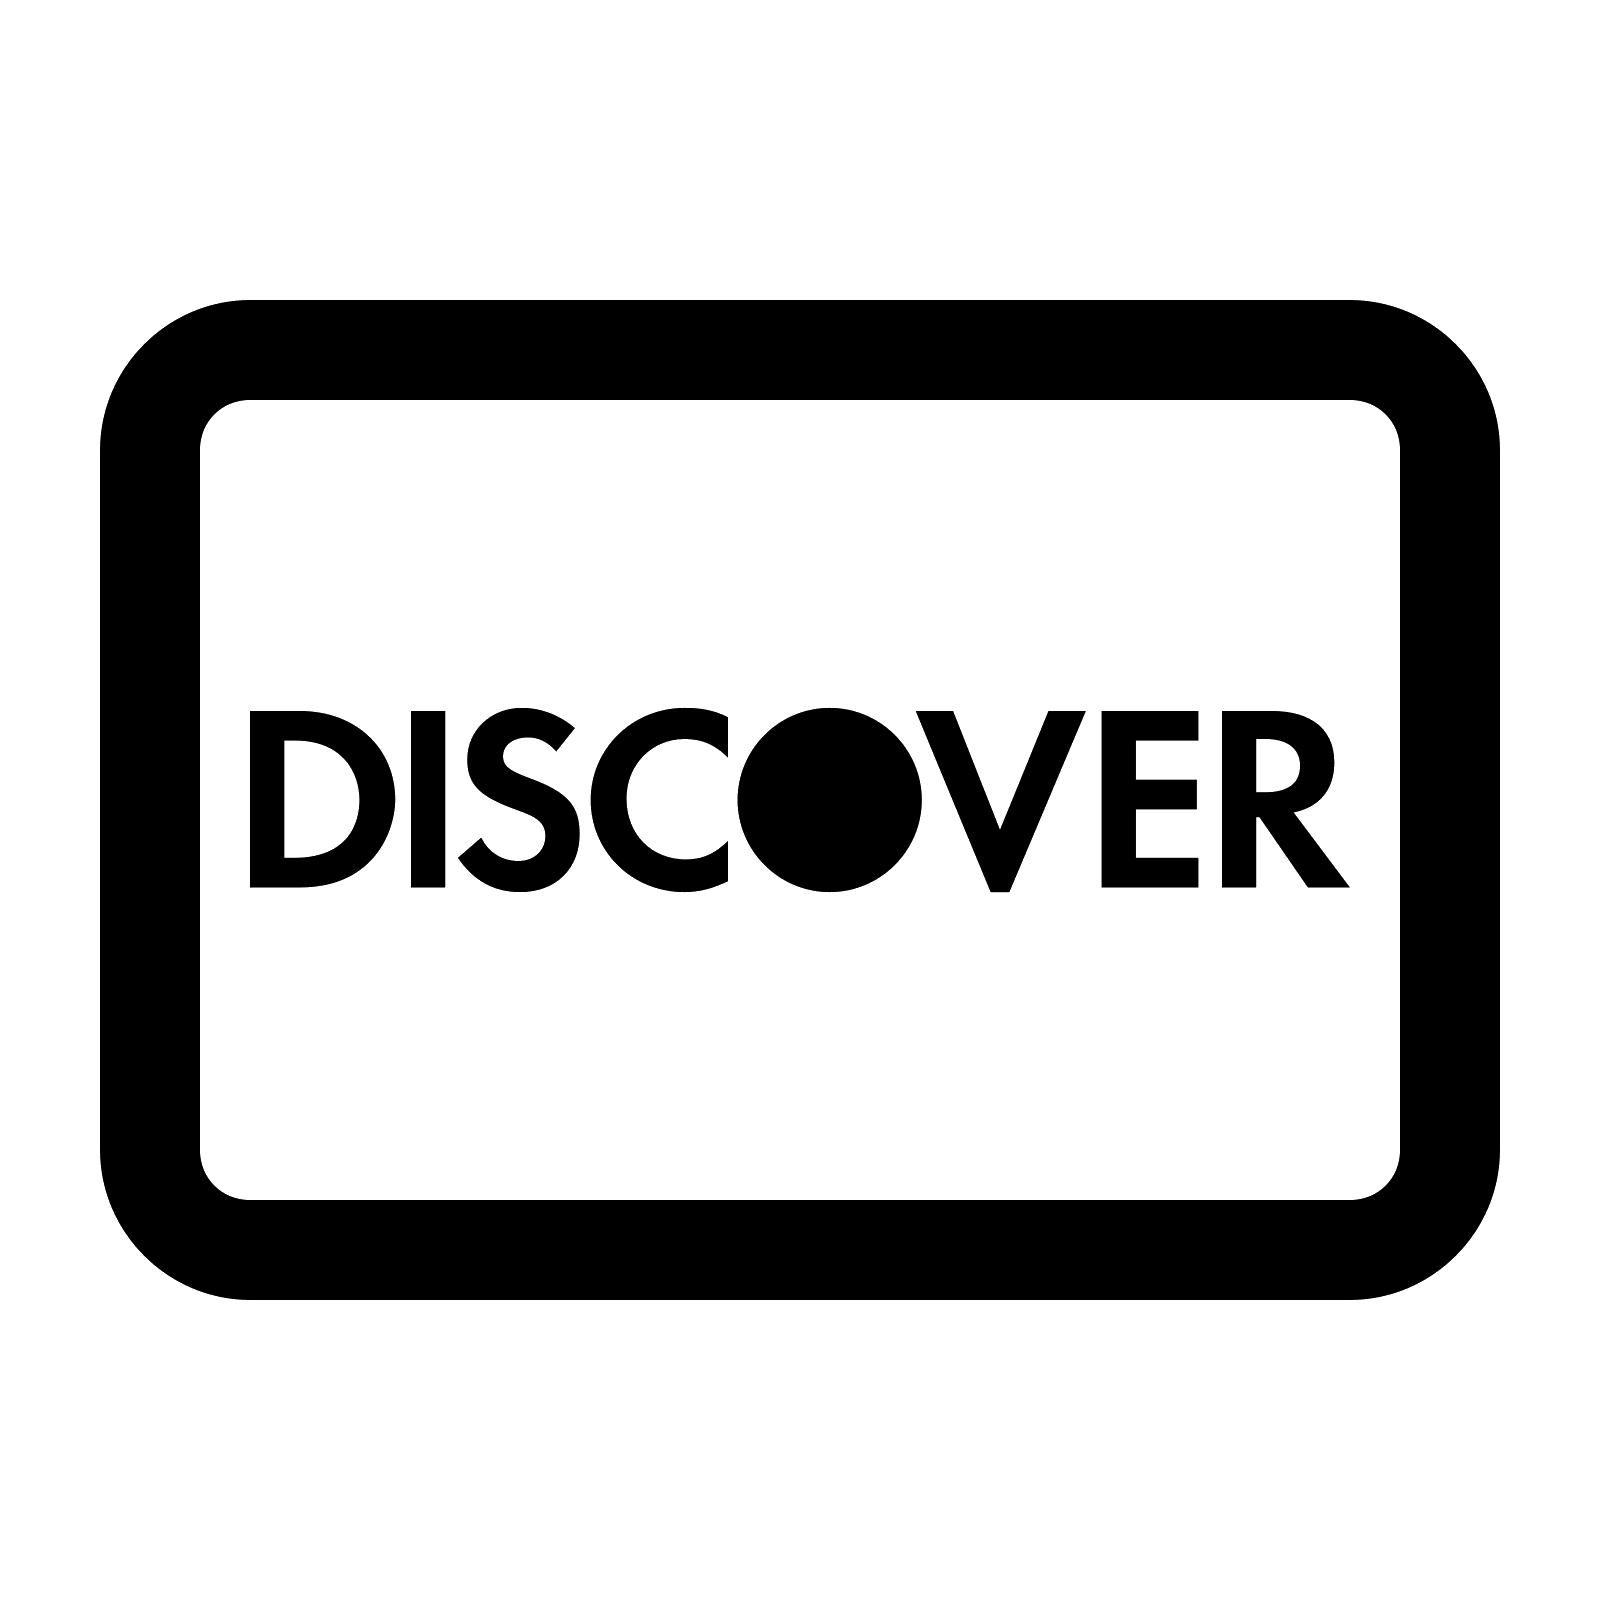 Discover Card Logo - Free Discover Card Icon 68905 | Download Discover Card Icon - 68905